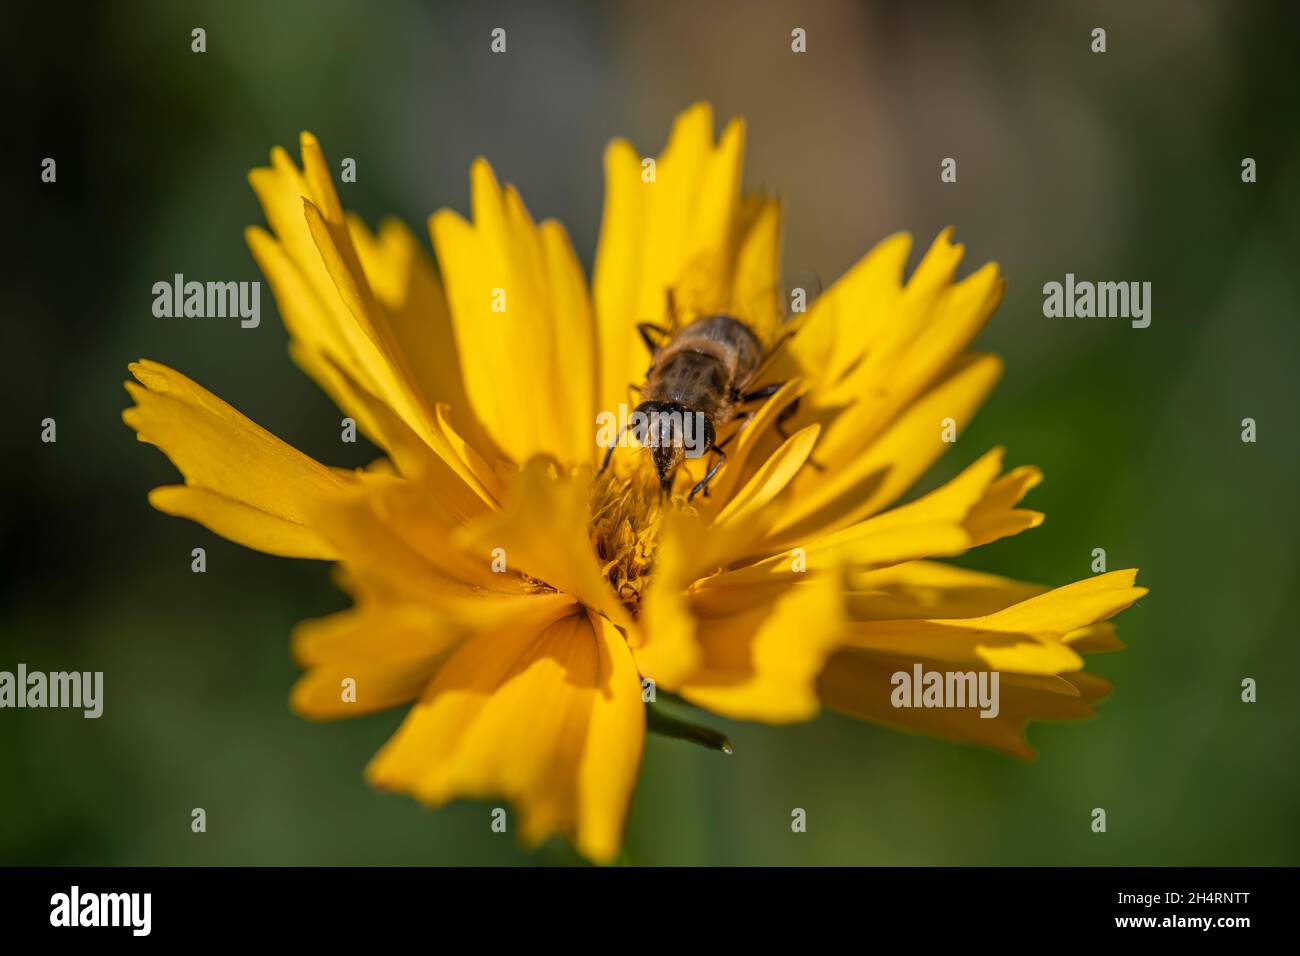 Hoverfly feeding on coreopsis flower Stock Photo